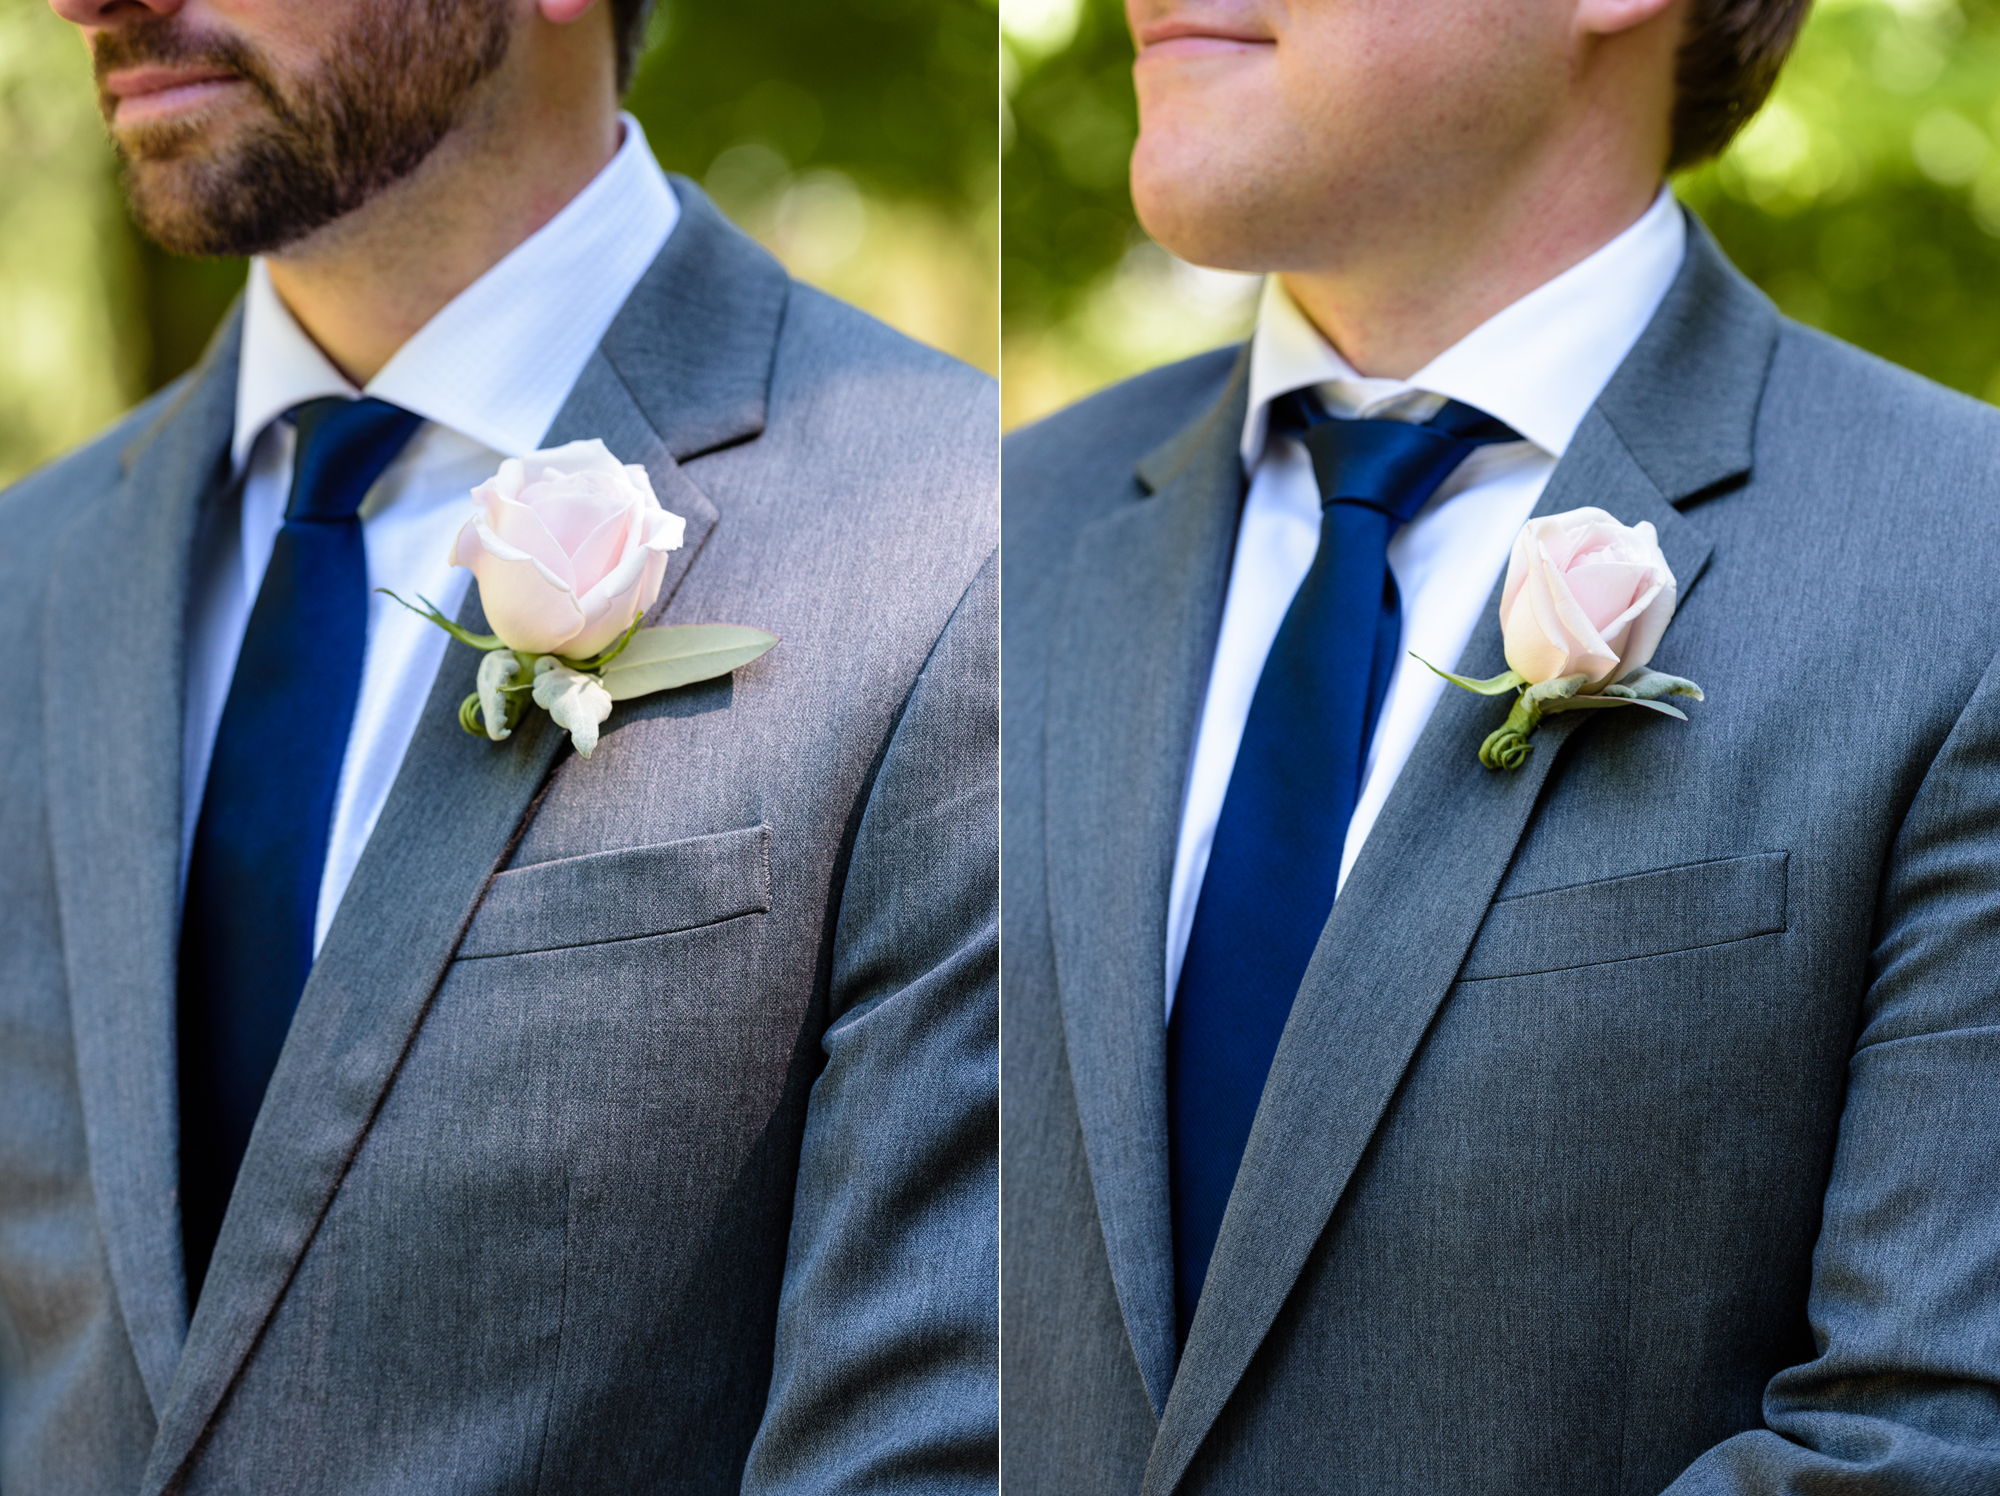 Groom's boutonnieres after a wedding ceremony at the Basilica of the Sacred Heart on the campus of Notre Dame